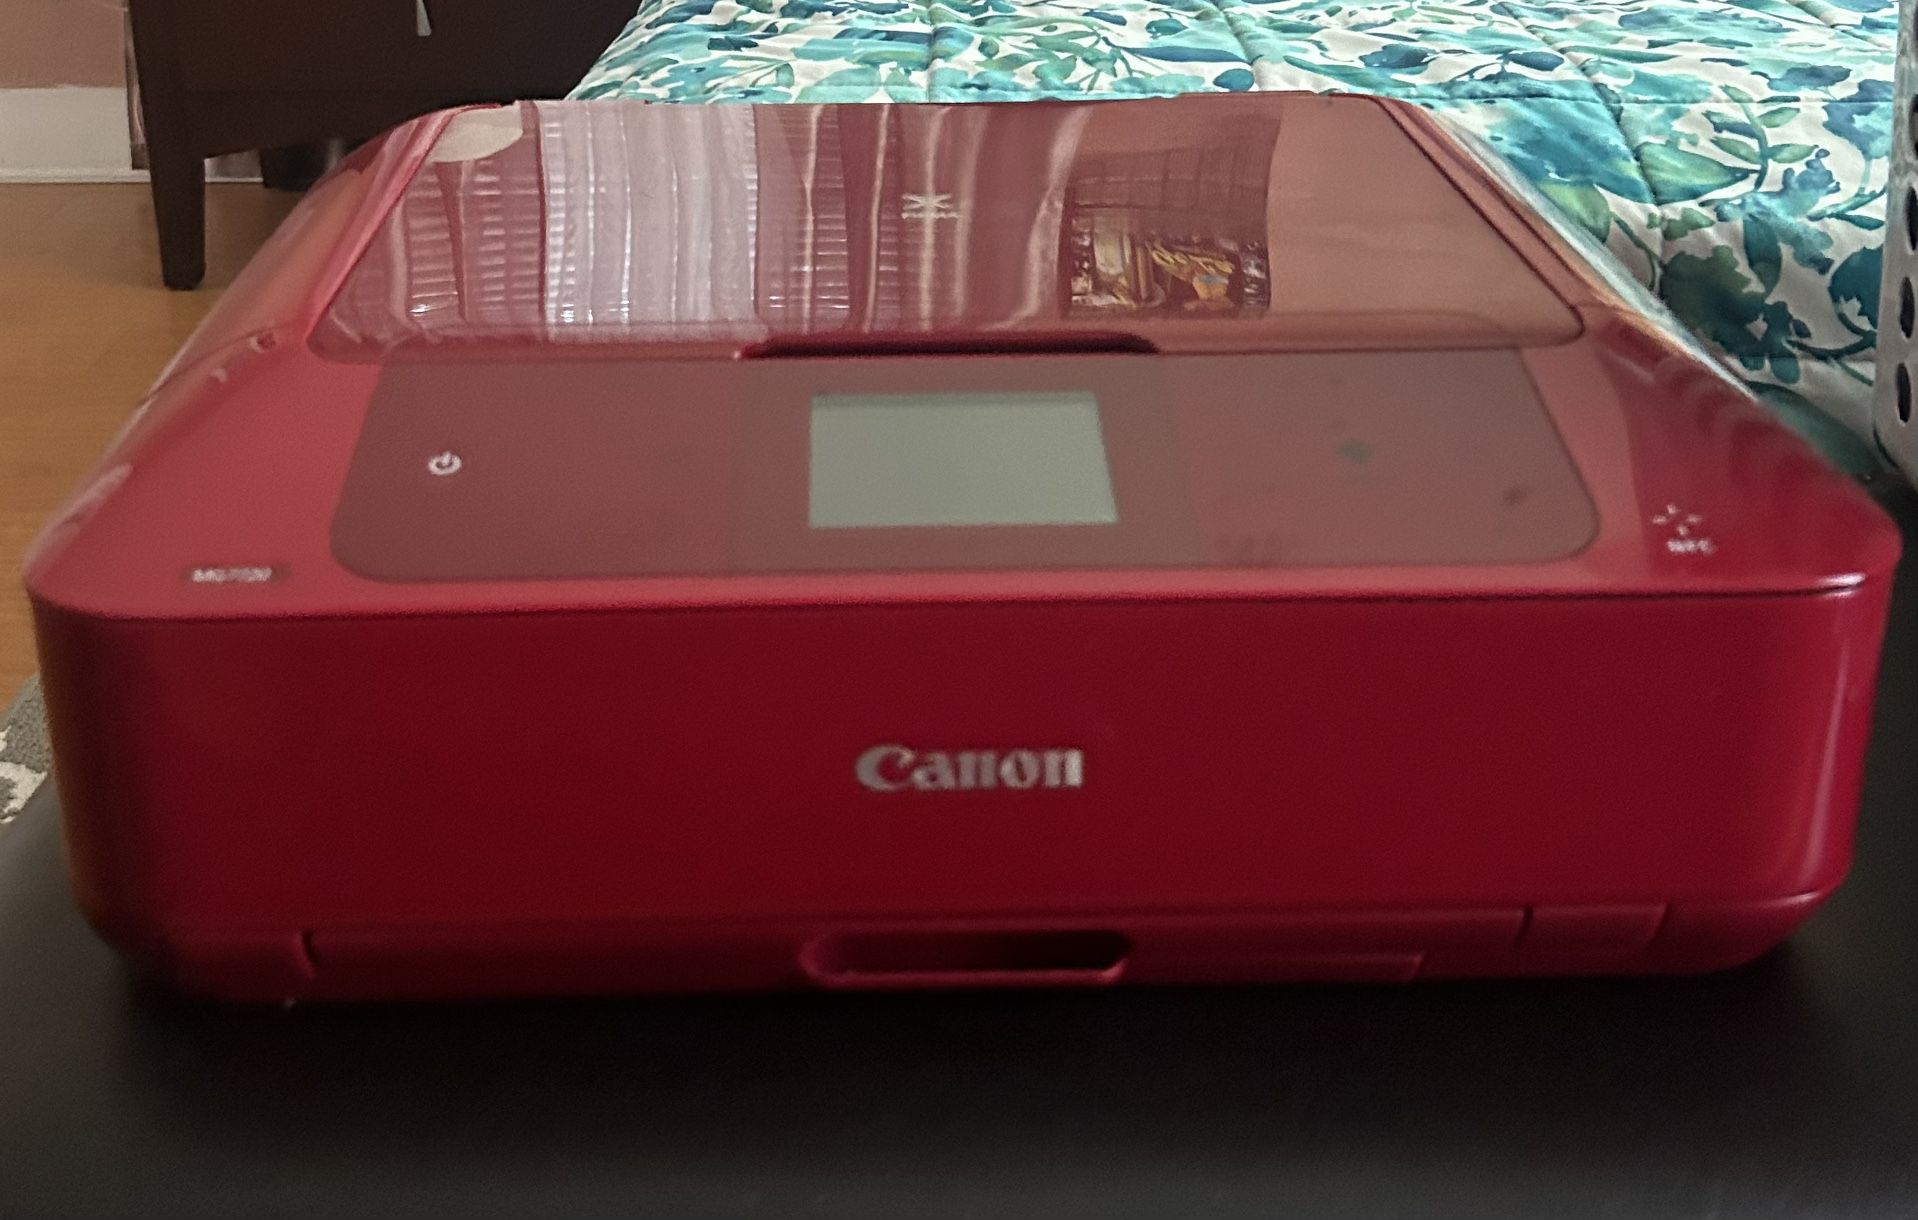 Red Canon PIXMA MG7120 All-In-One Inkjet Printer DOES NOT COME With A Cable